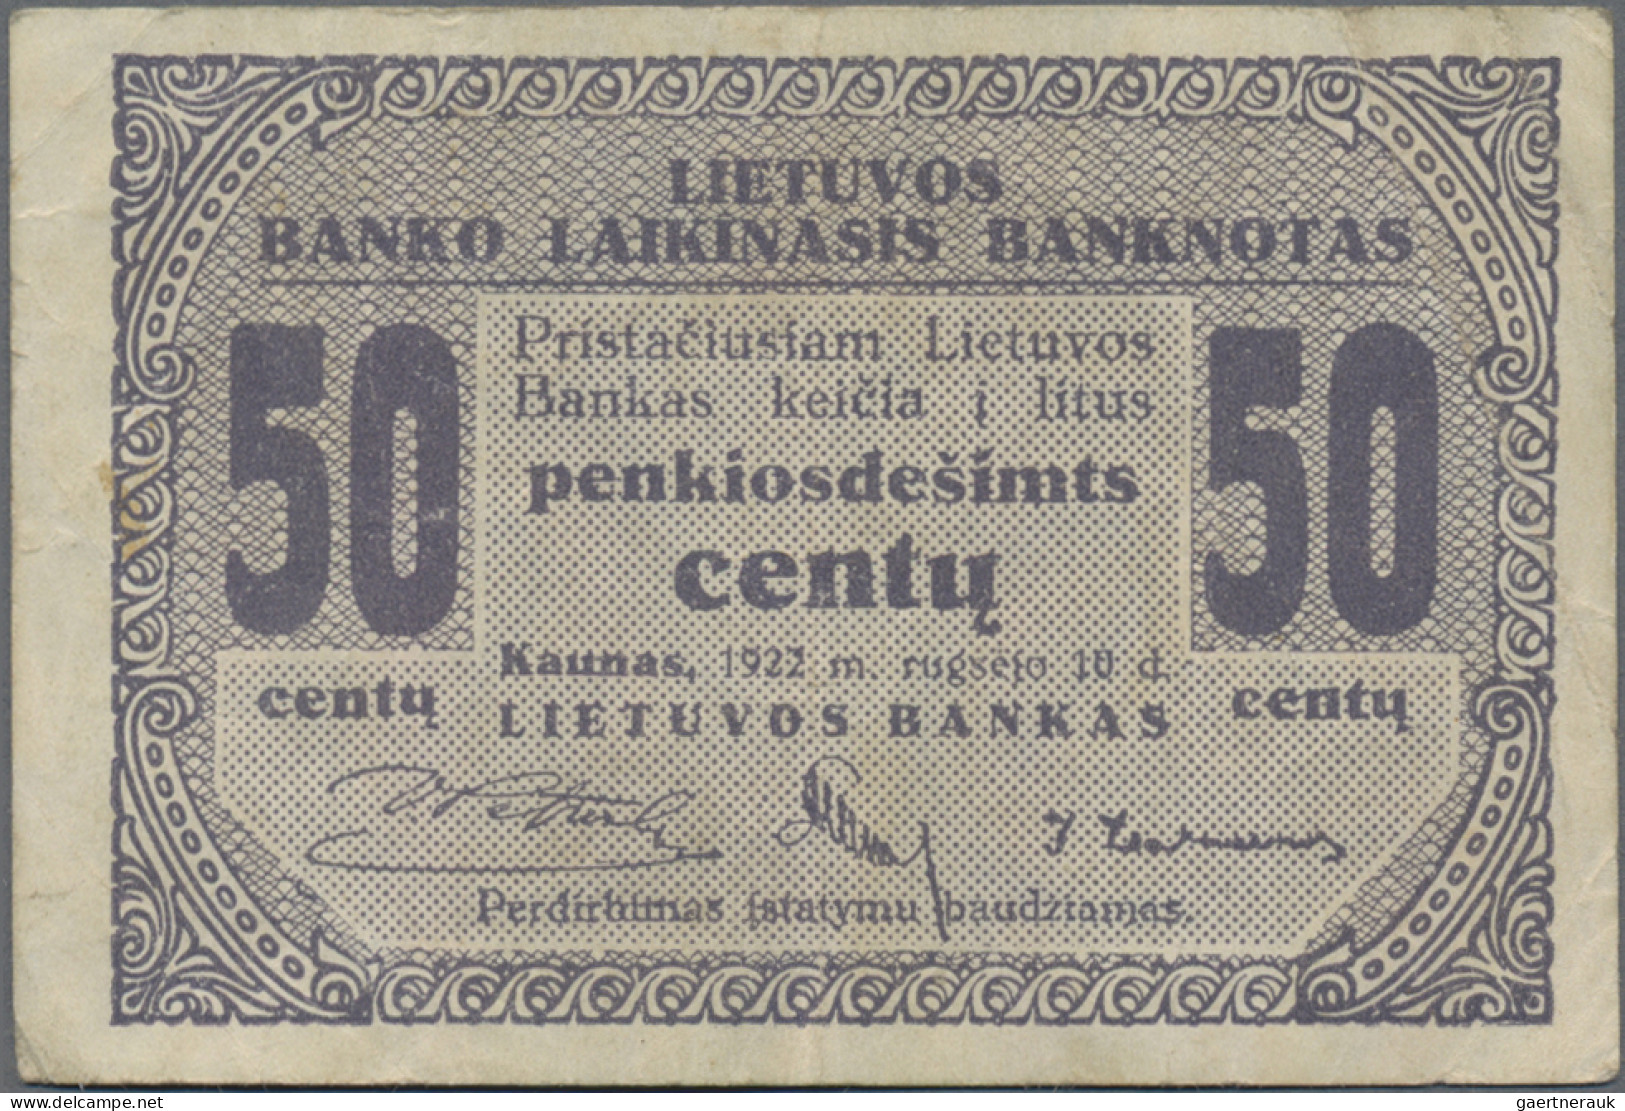 Lithuania: Very nice set with 5 banknotes, series 1922, comprising 1 Centas (P.1